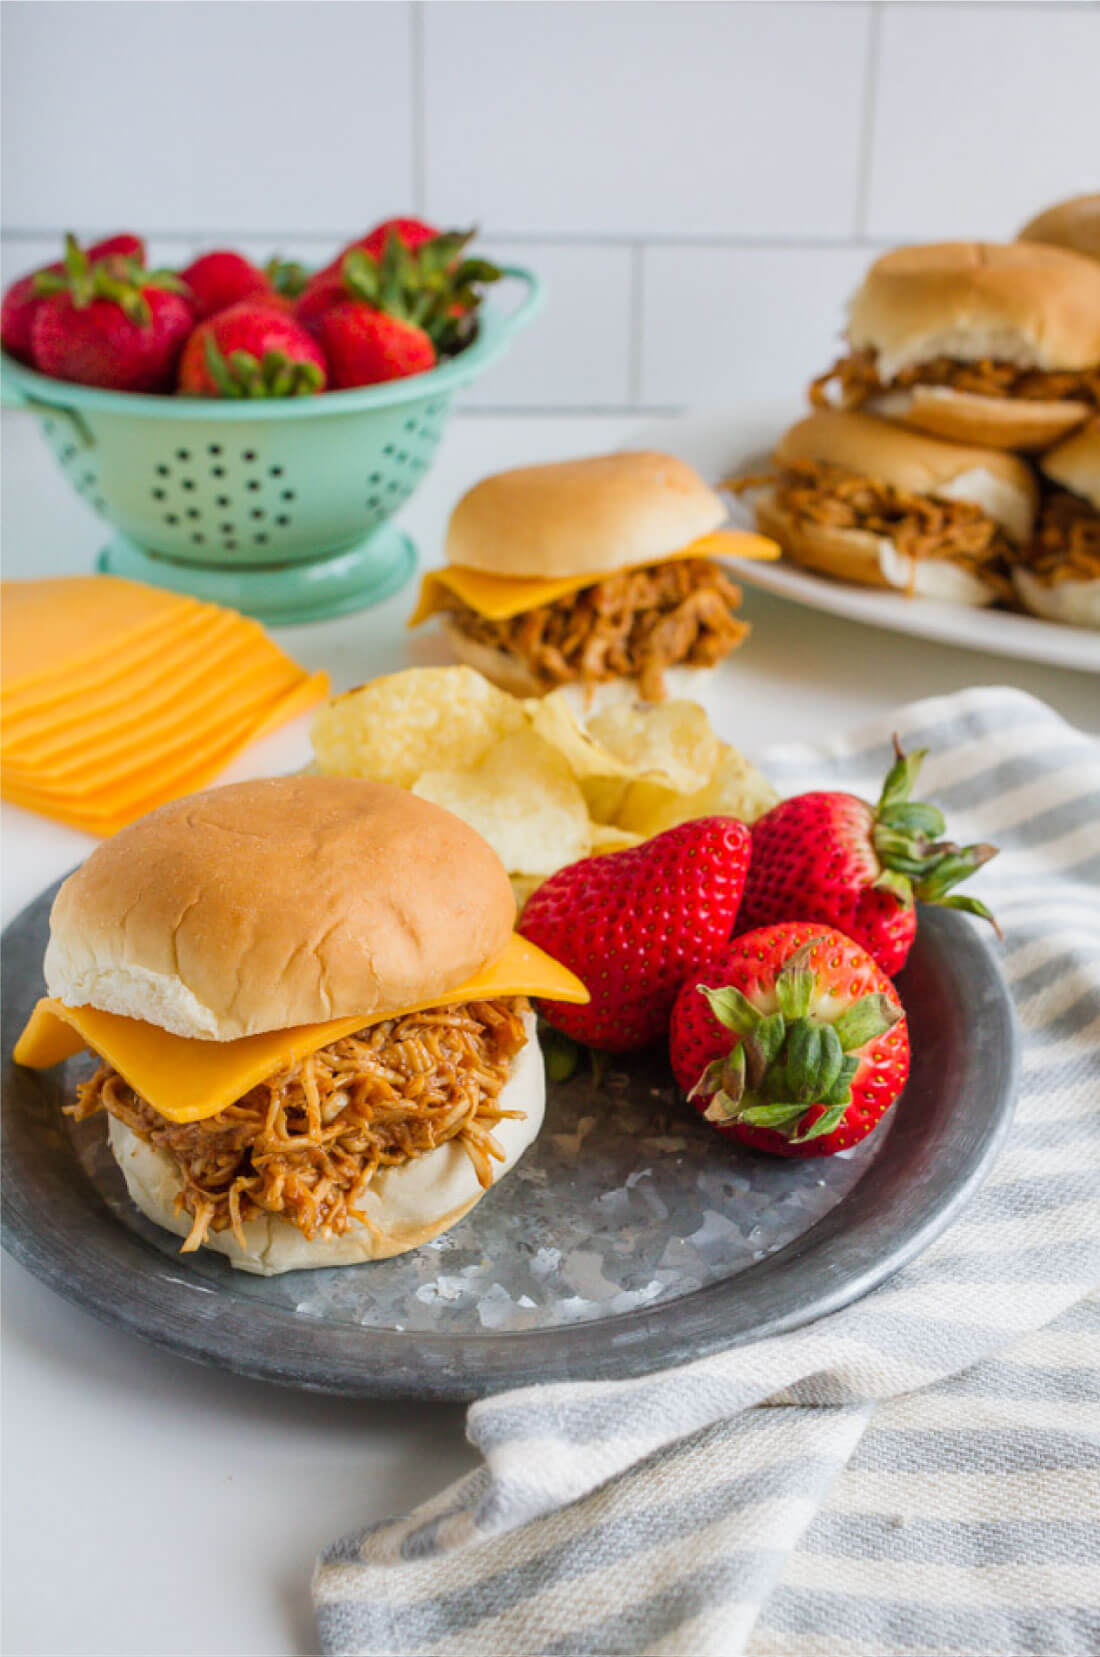 Crockpot Buffalo Chicken Sliders - make this easy slow cooker meal that your whole family will love!